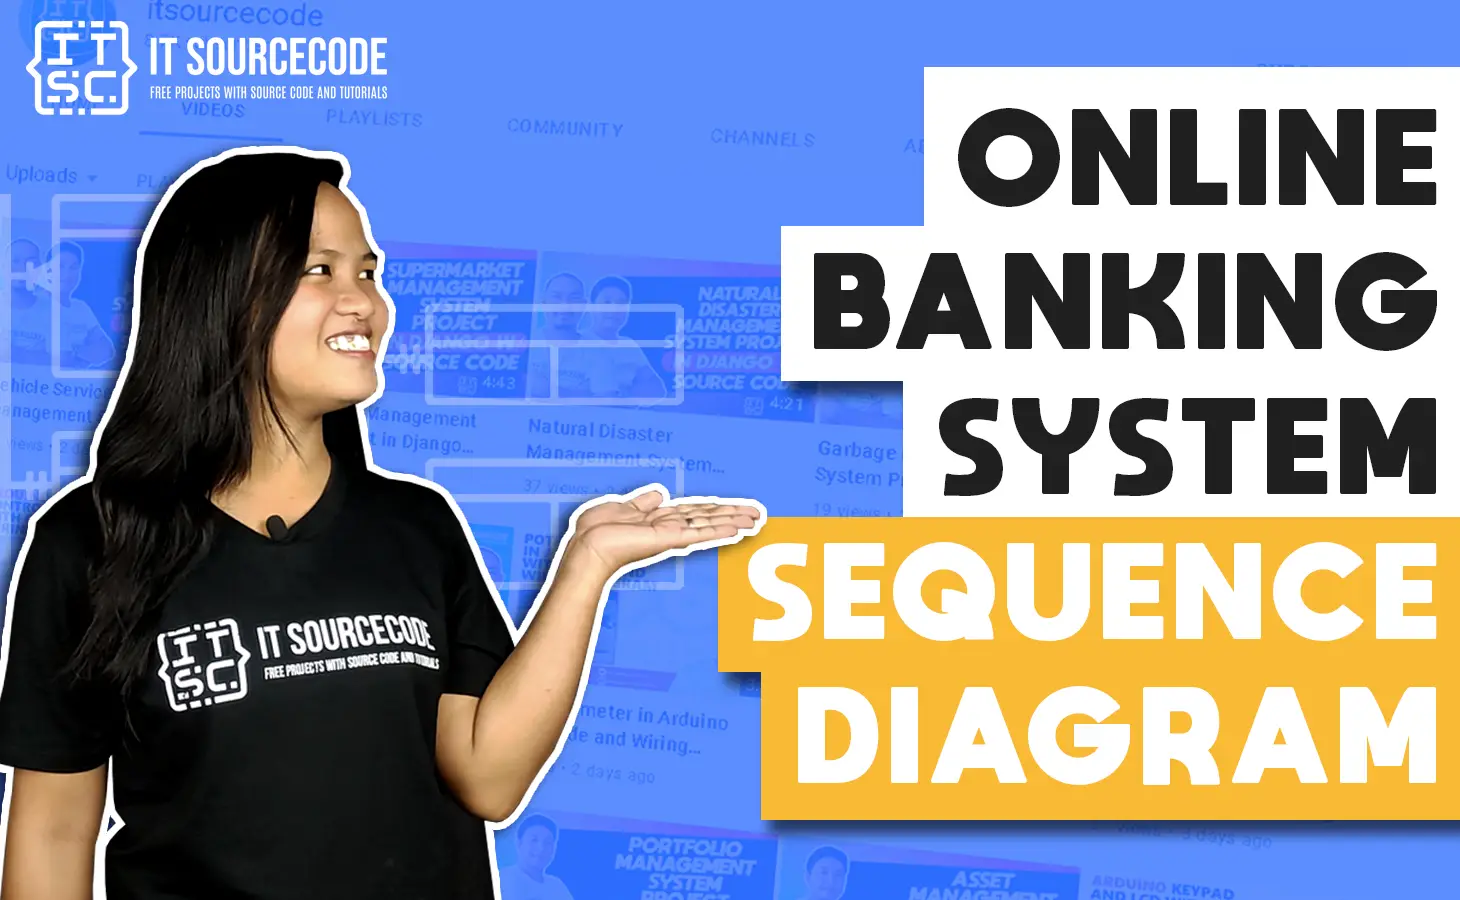 Sequence Diagram for Online Banking System